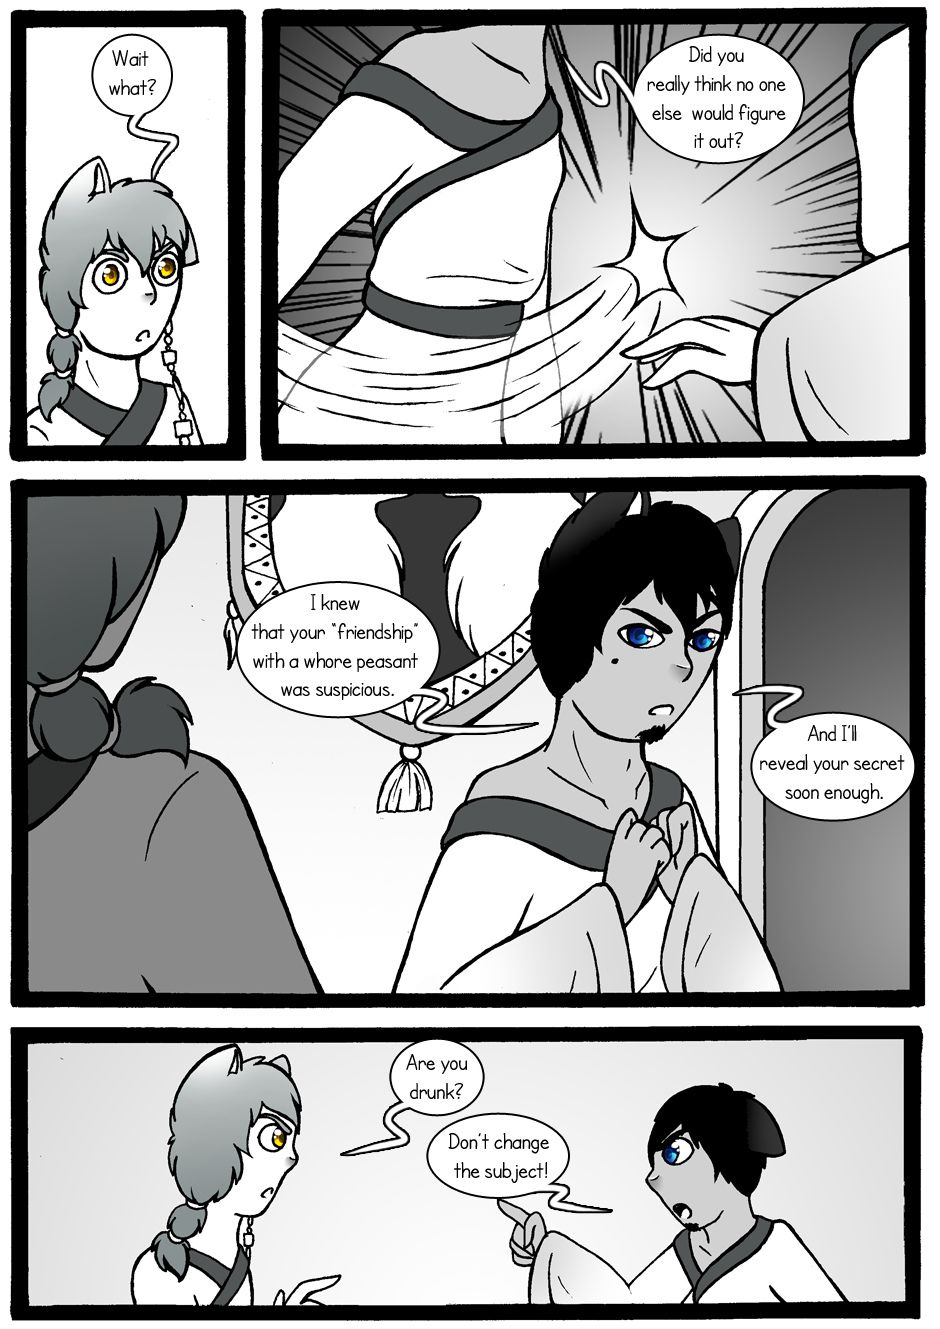 [Jeny-jen94] Between Kings and Queens [Ongoing] 108